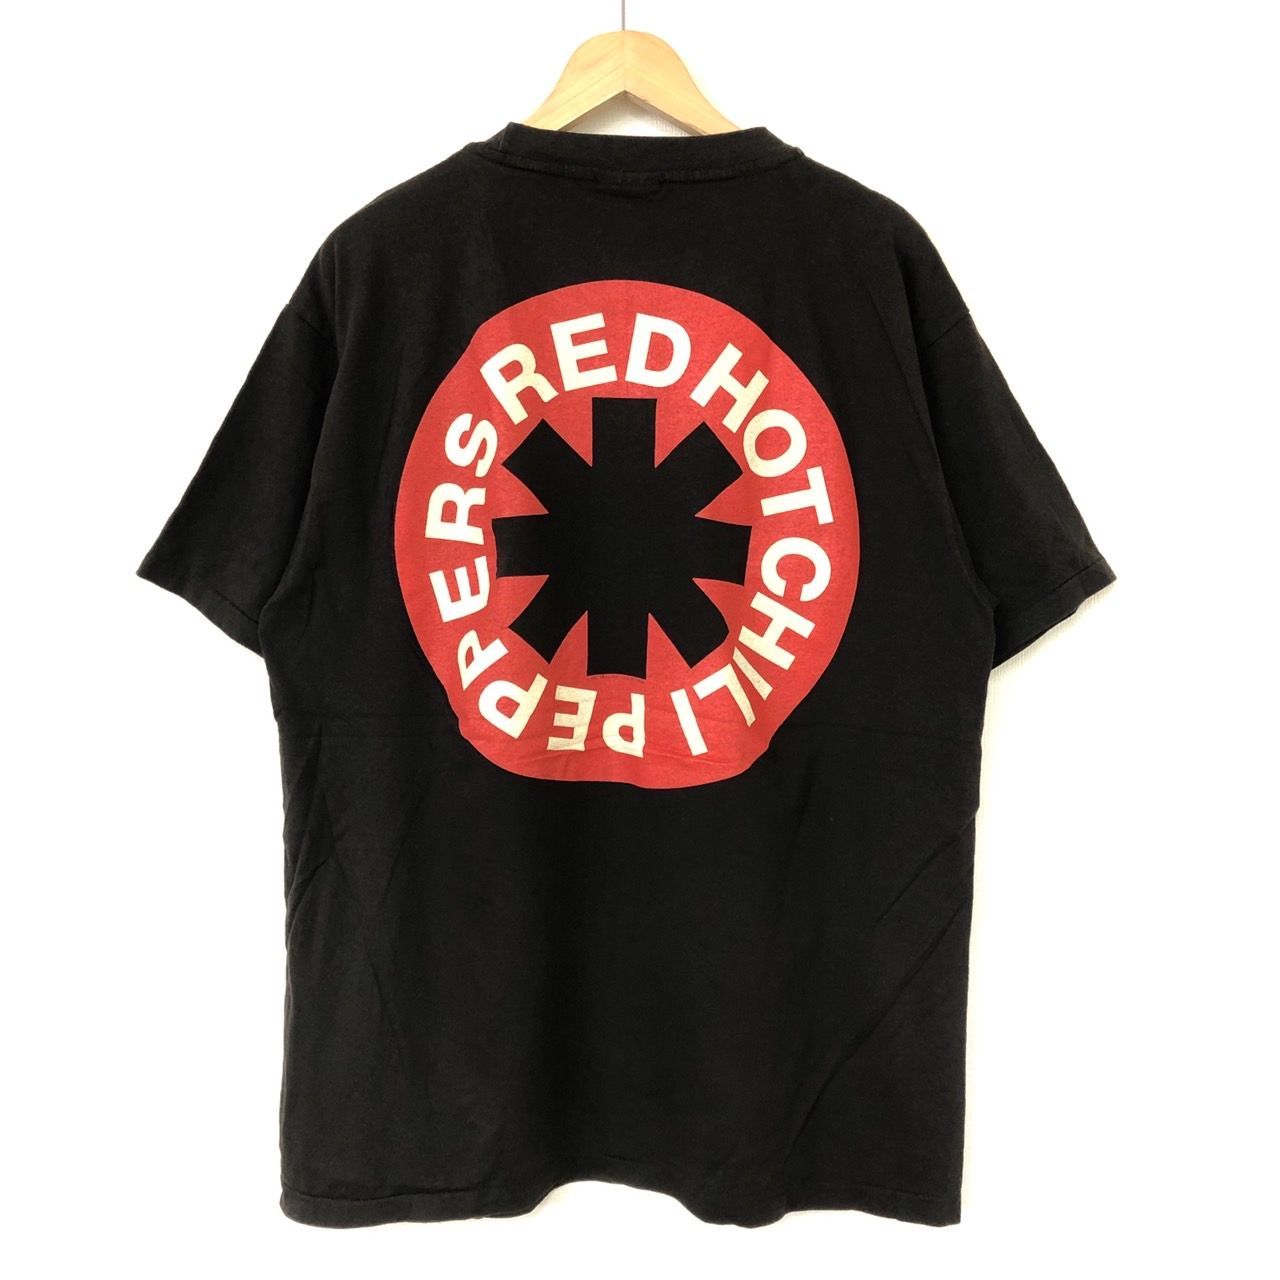 RED HOT CHILI PEPPERS Tシャツ 黒XL デッドストックBody